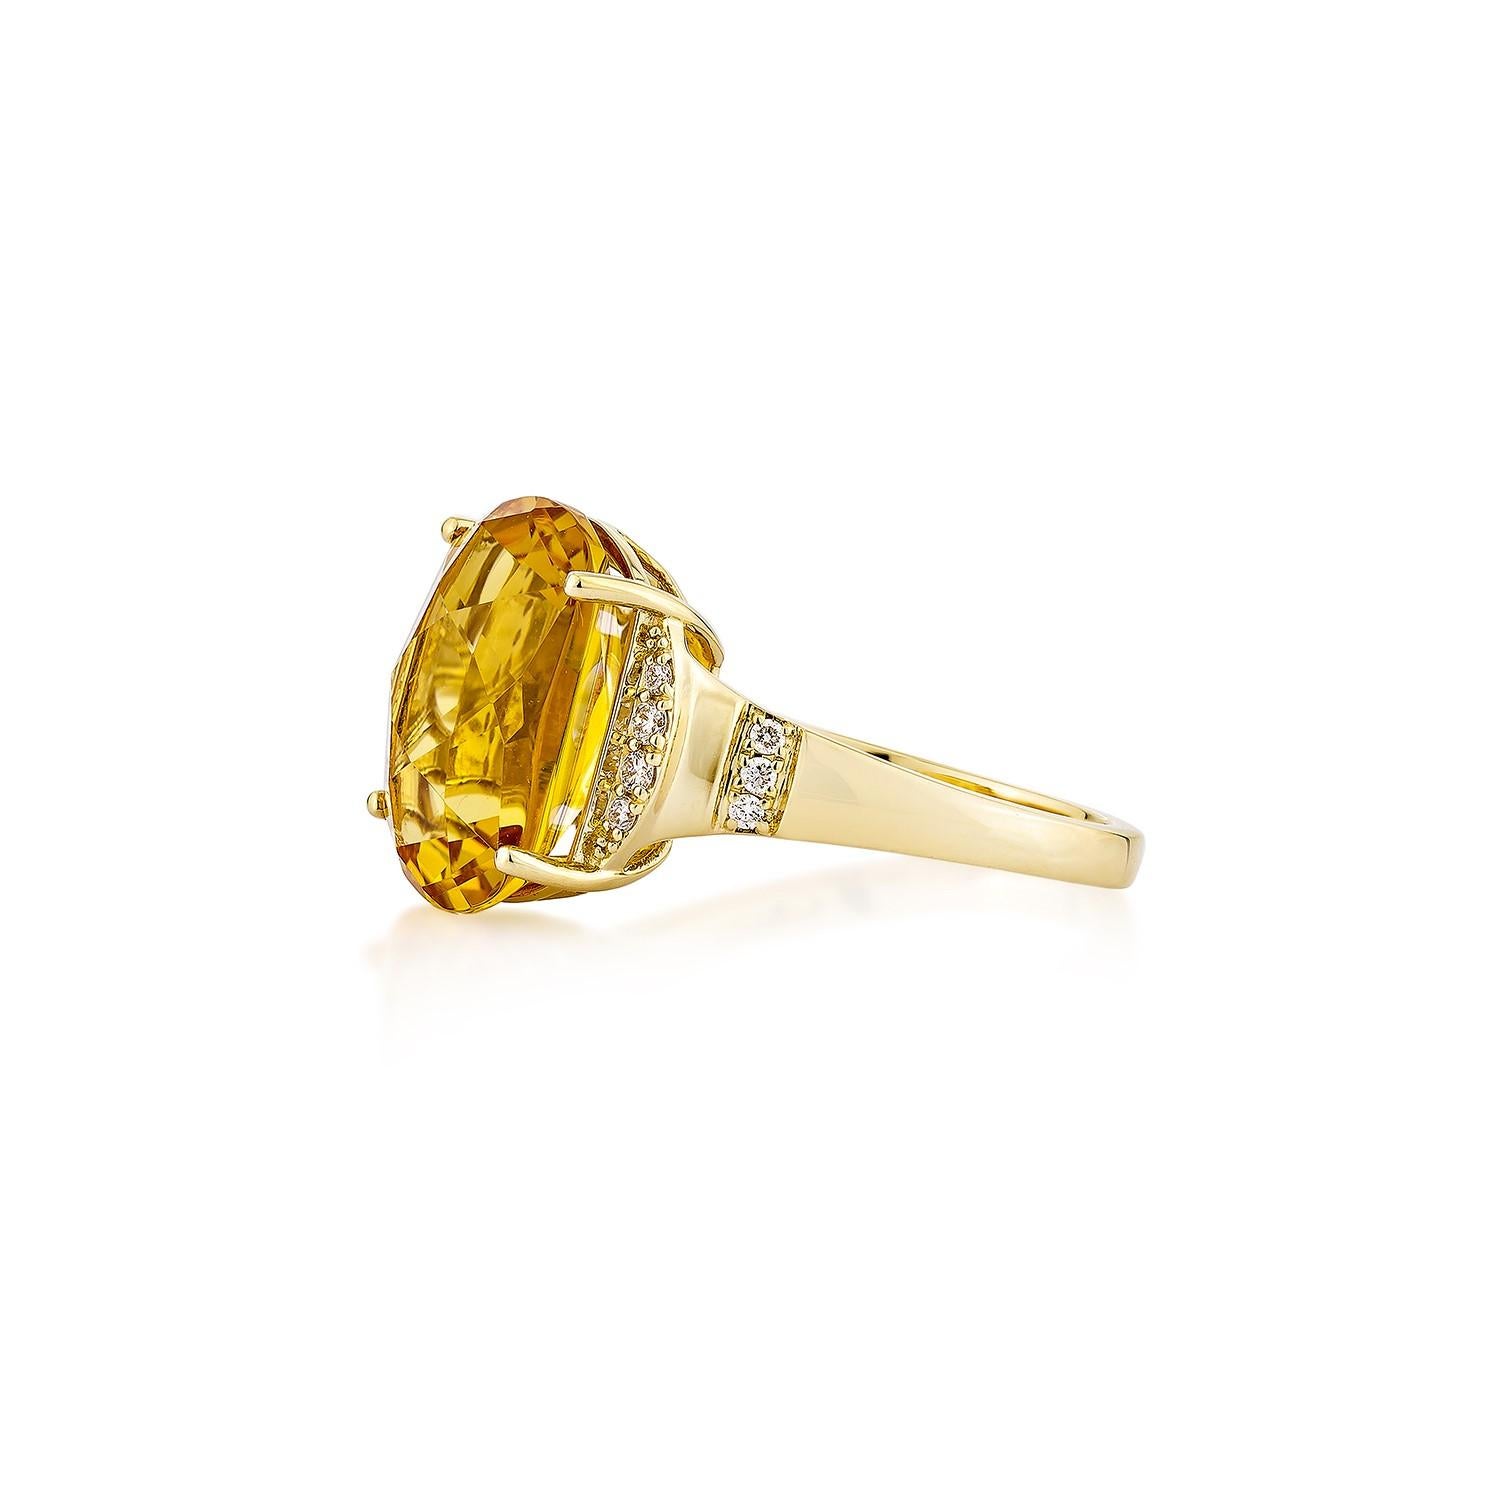 Oval Cut 5.84 Carat Citrine Fancy Ring in 18Karat Yellow Gold with  White Diamond. For Sale